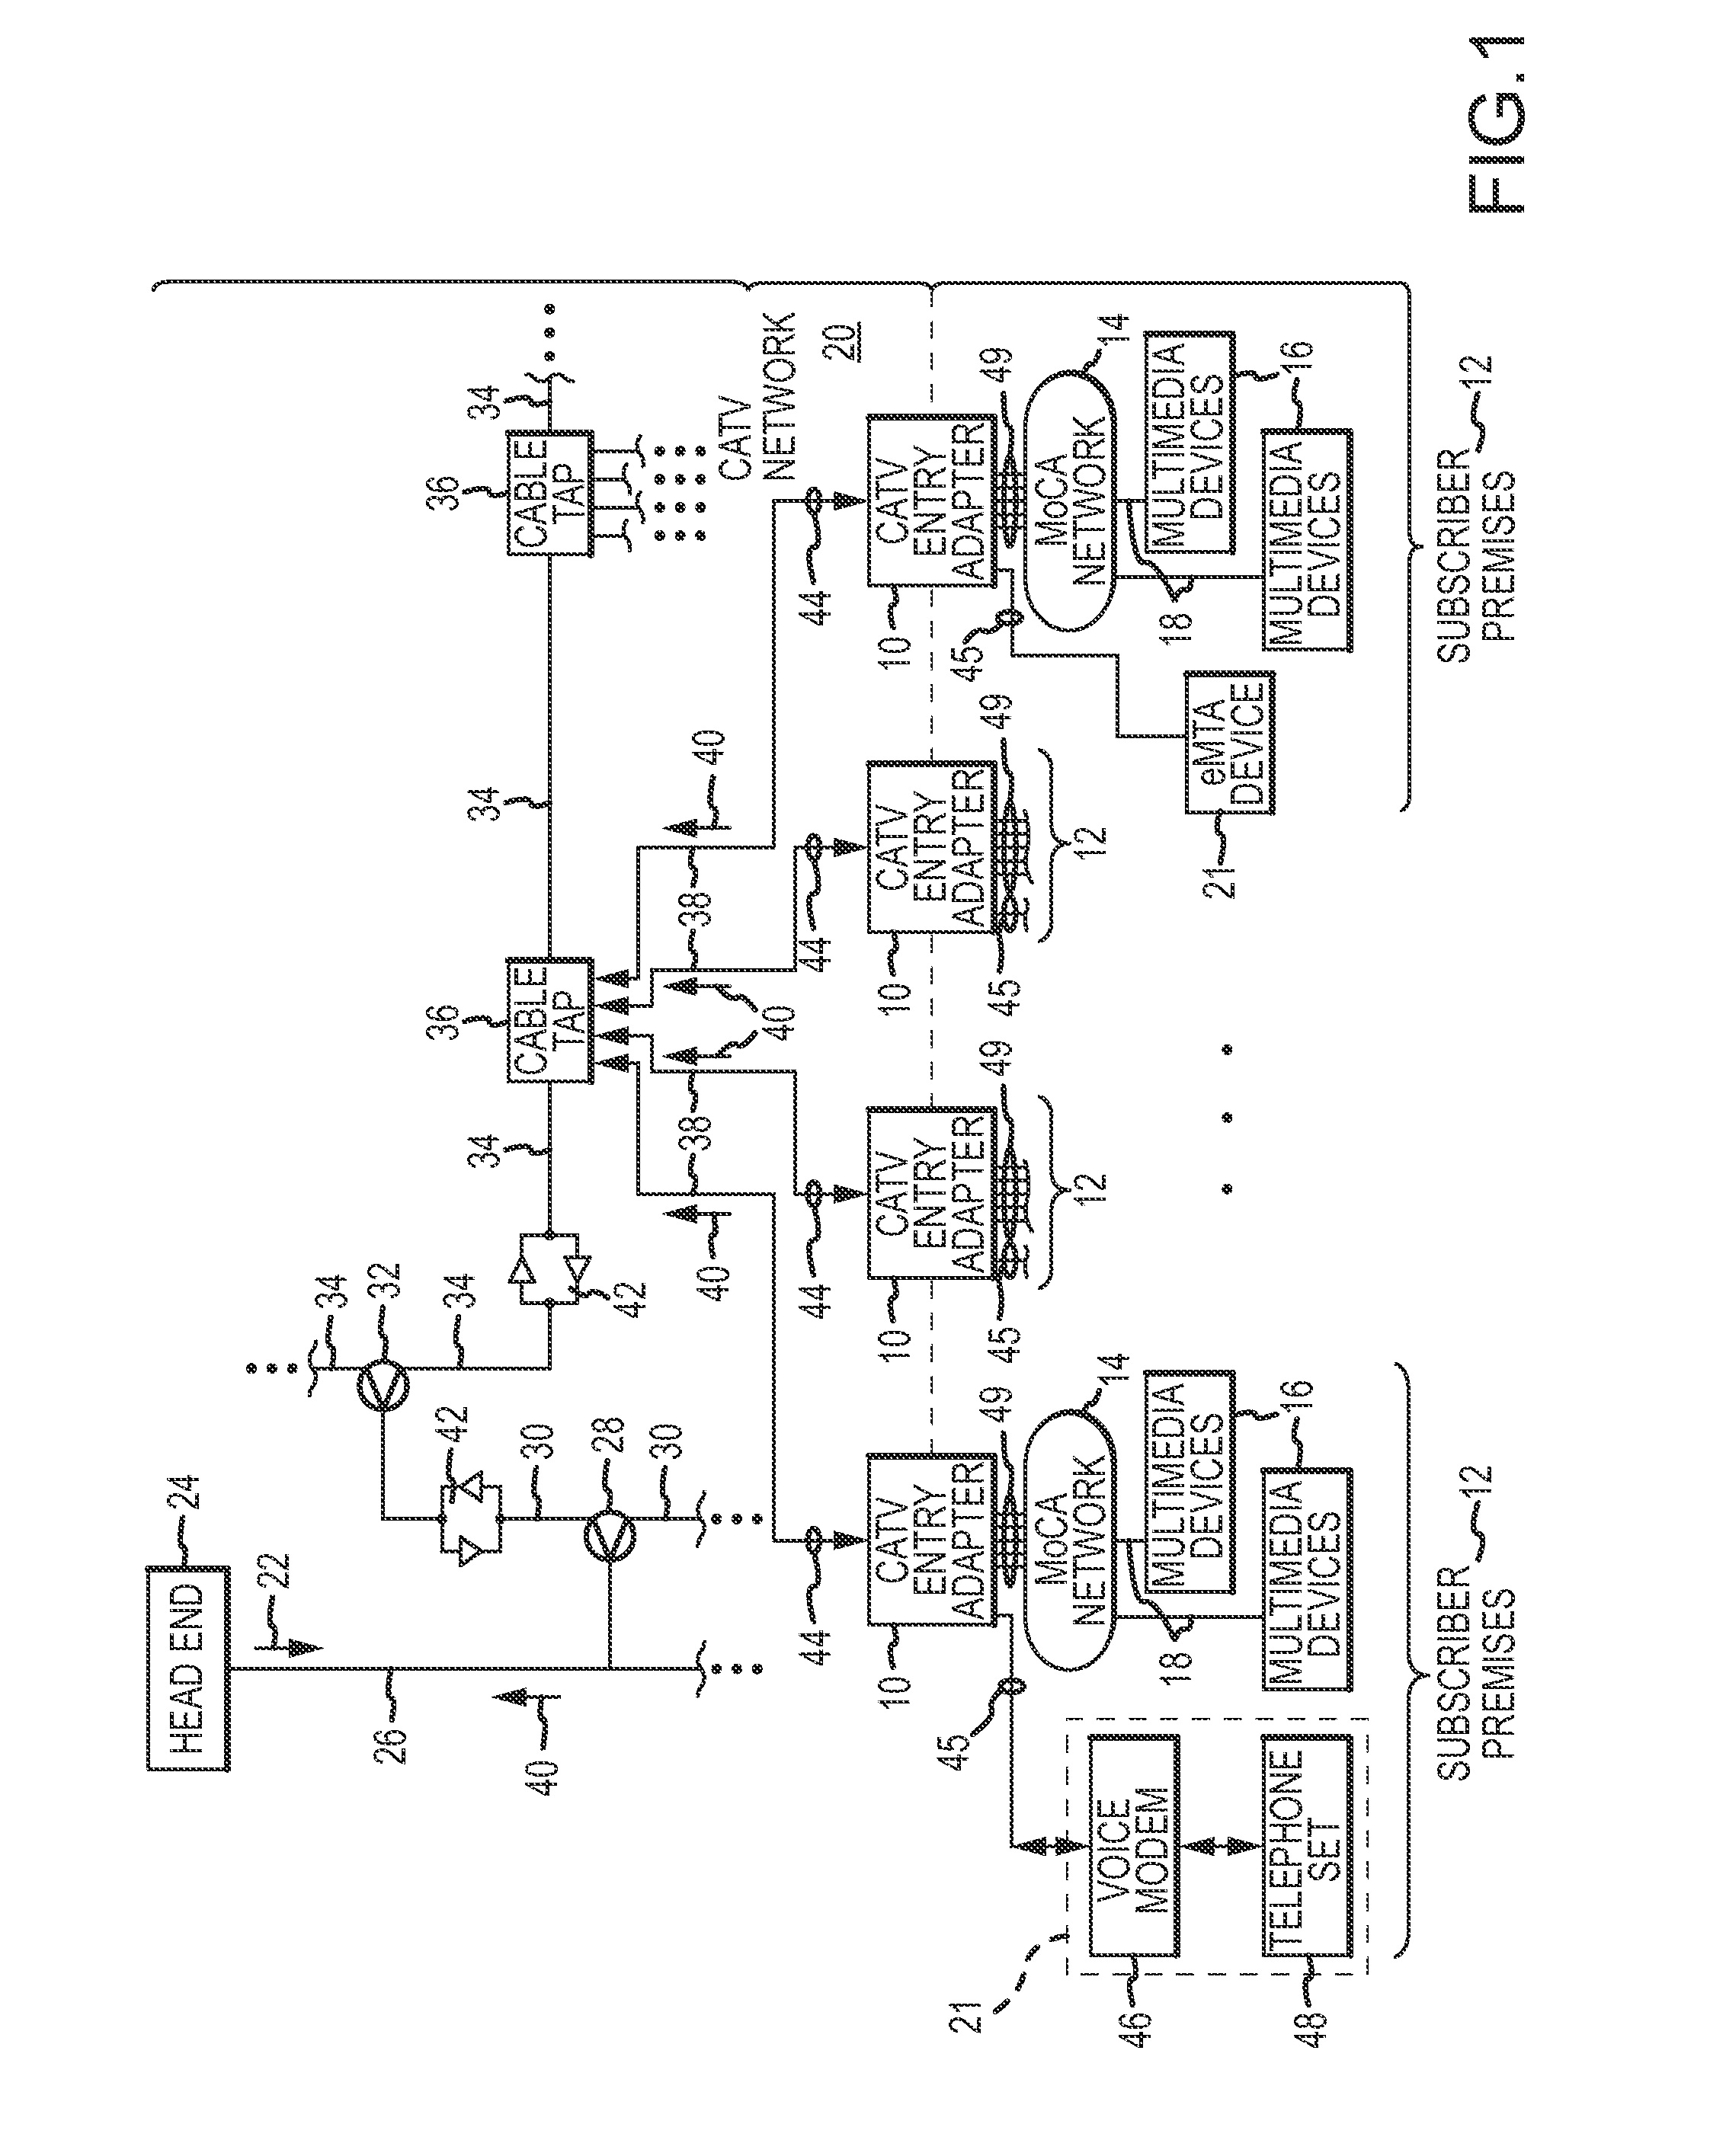 CATV Entry Adapter and Method for Preventing Interference with eMTA Equipment from MoCA Signals